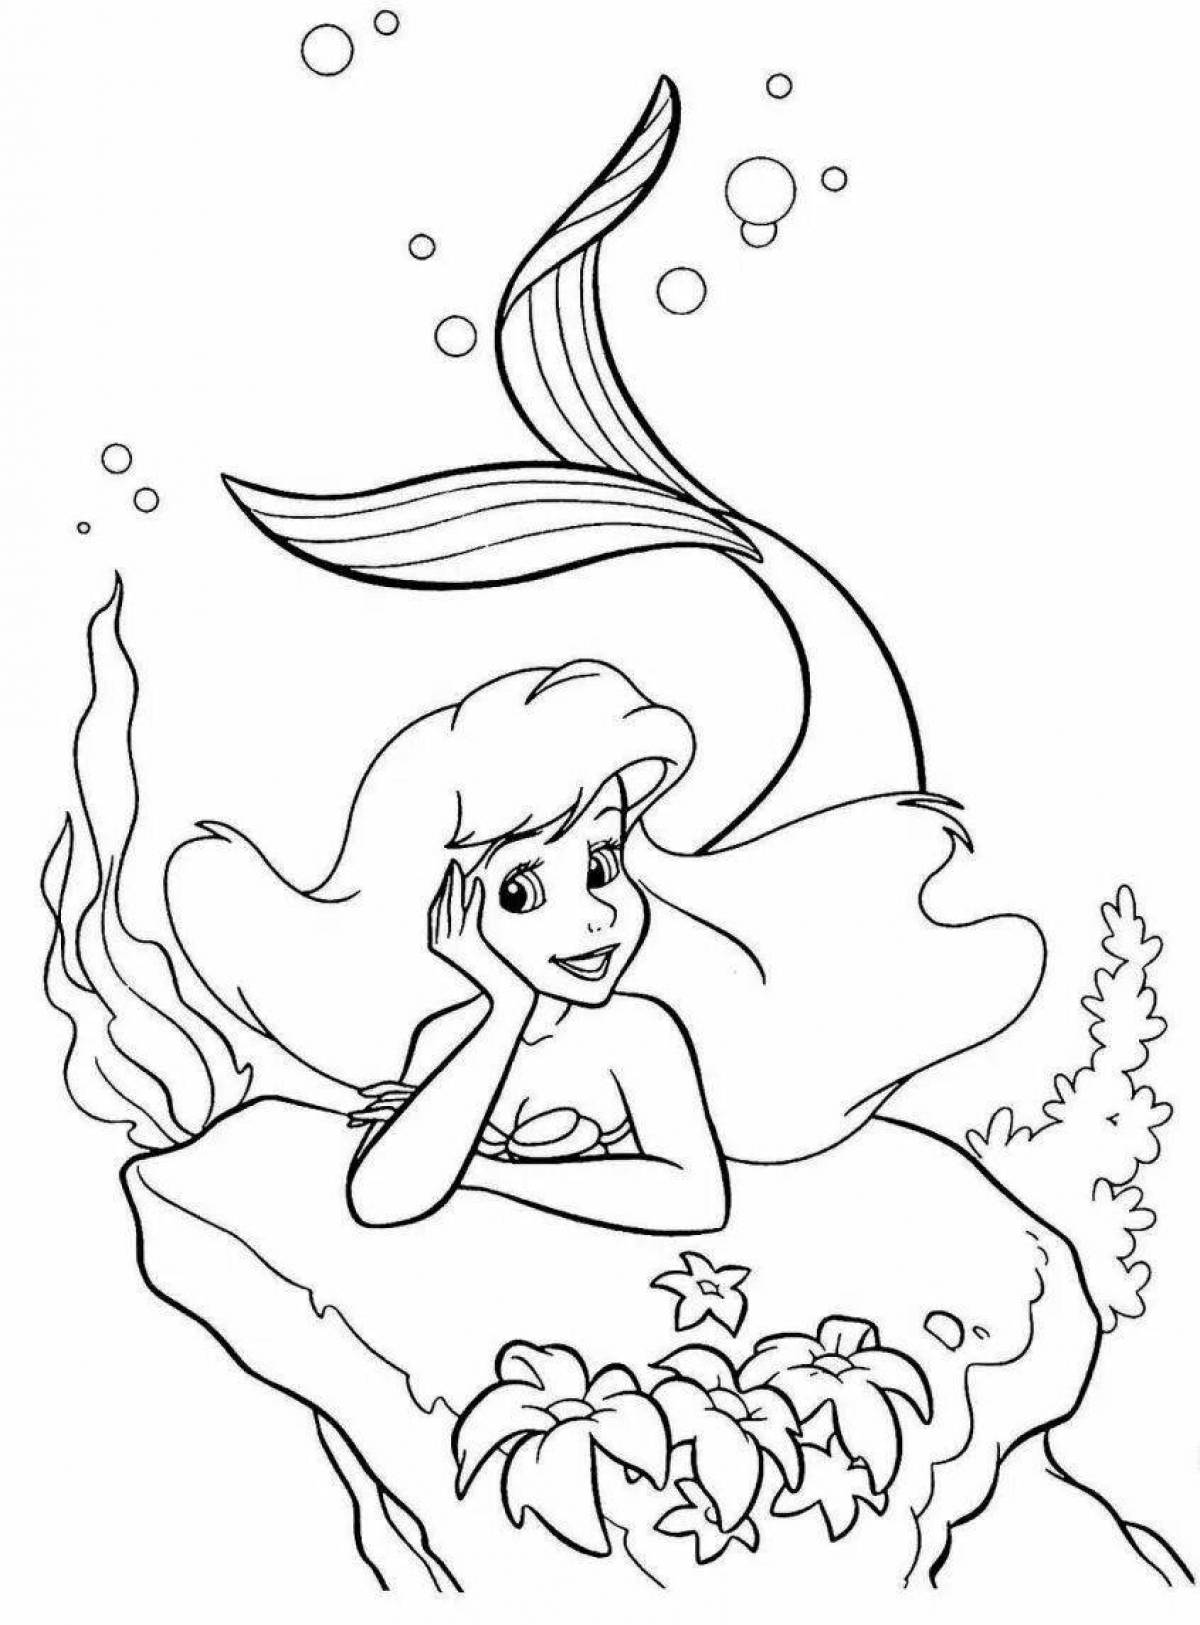 Playful little mermaid coloring book